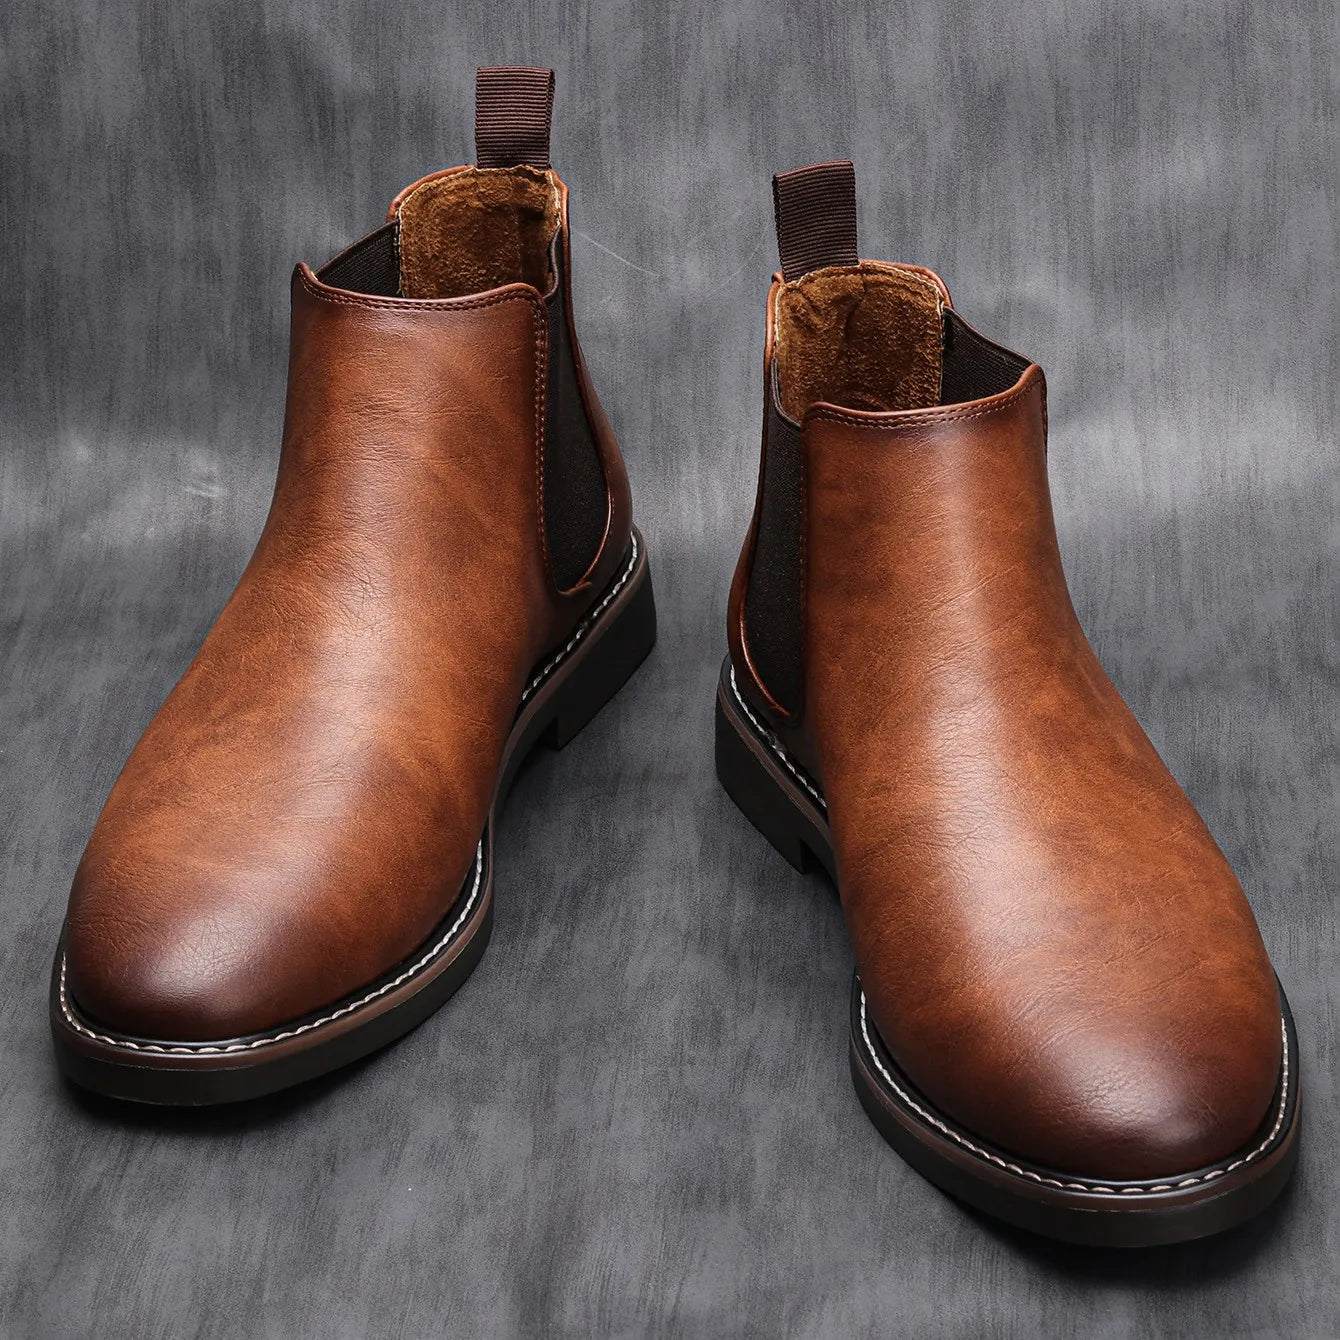 Heritage Step: Classic Men's Chelsea Boots for Modern Comfort